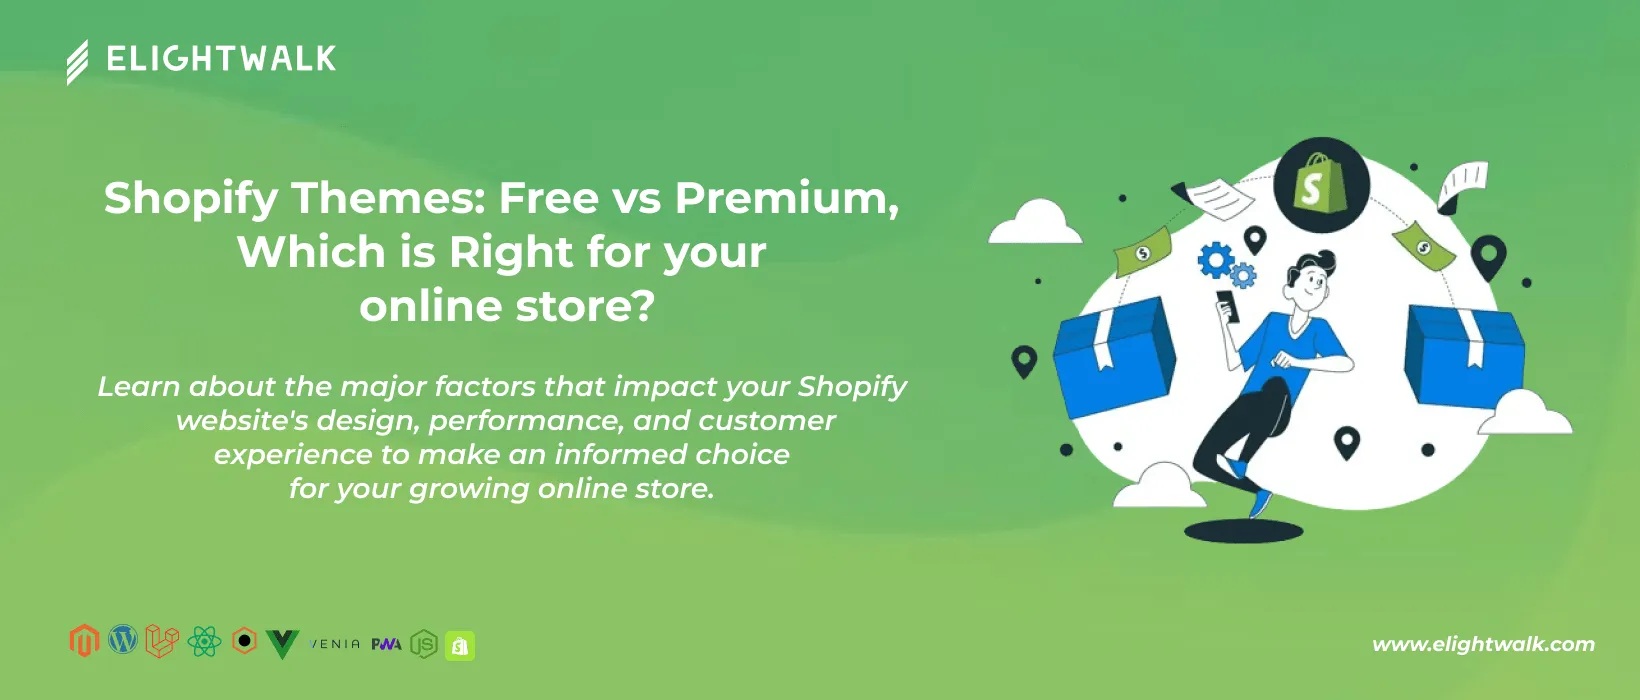 Shopify Themes: Free vs Premium, Which is Right for your online store?